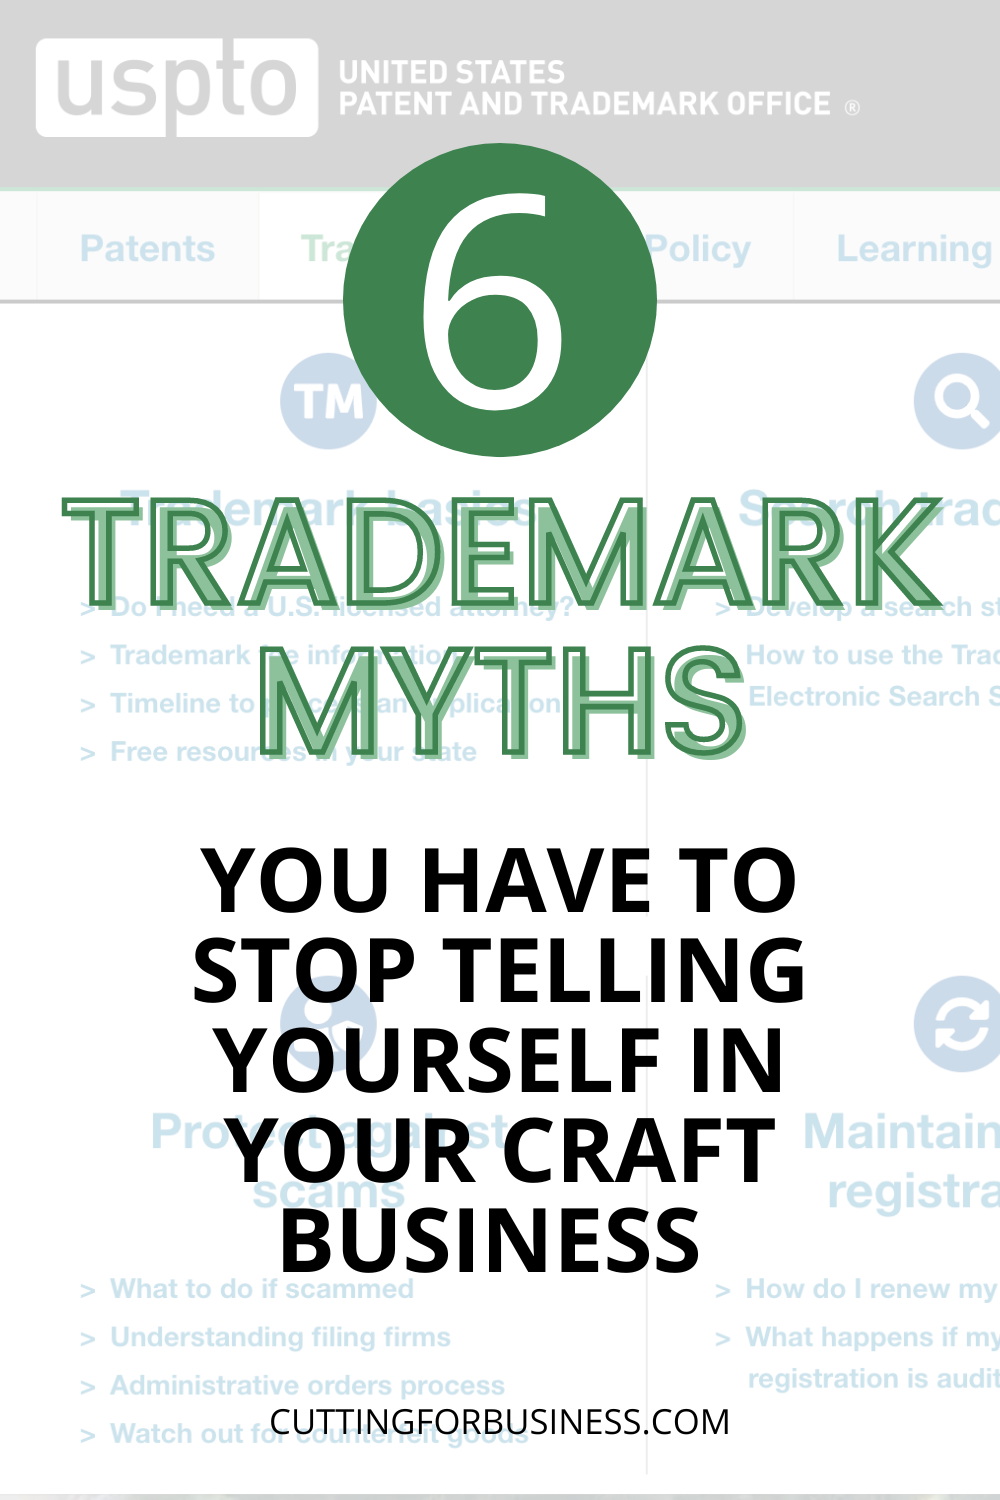 6 Trademark Myths You Have to Stop Telling Yourself in Your Craft Business - Silhouette, Cricut, Glowforge - cuttingforbusiness.com.